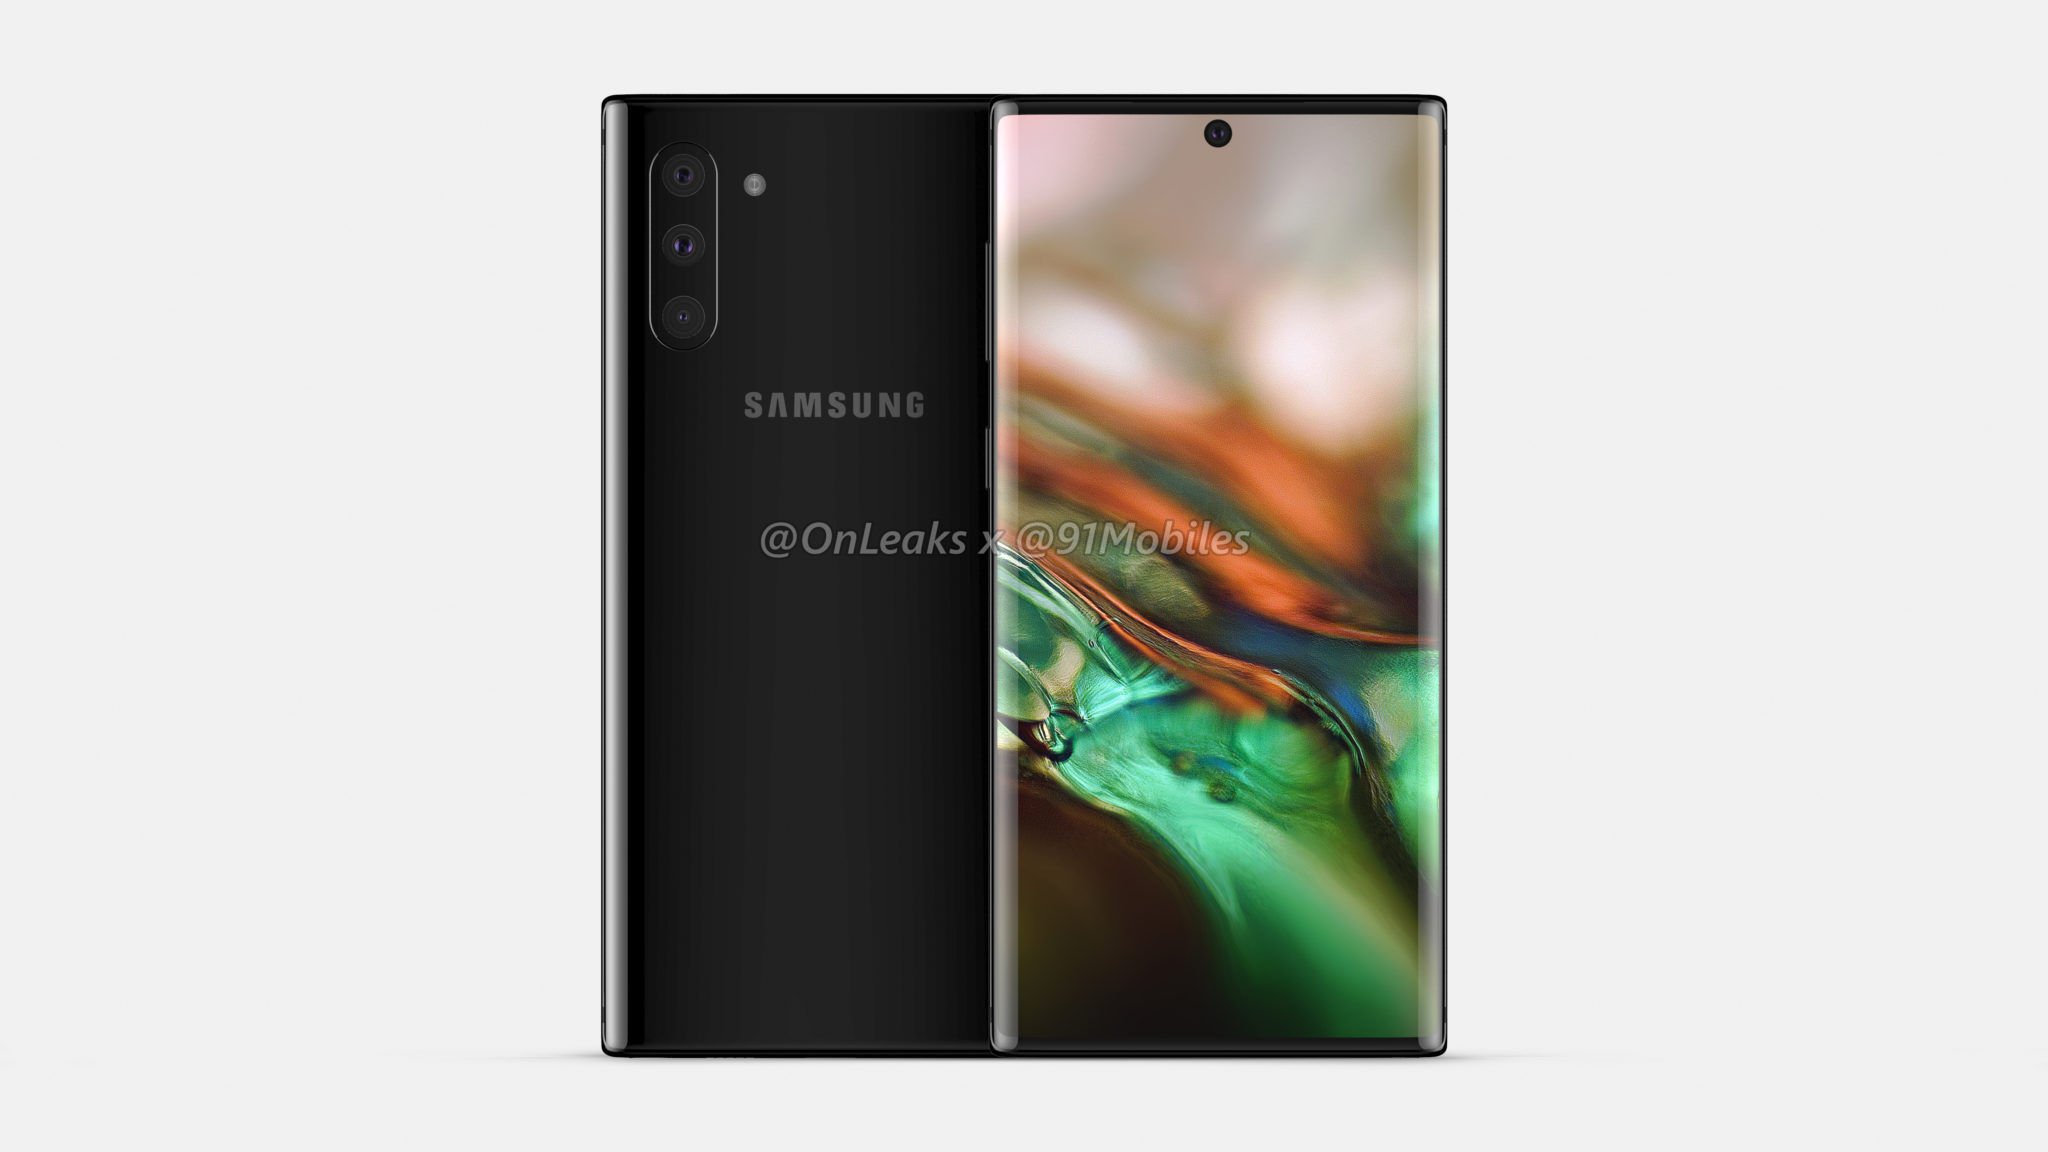 Samsung Galaxy Note 10 Lite: All the rumors in one place